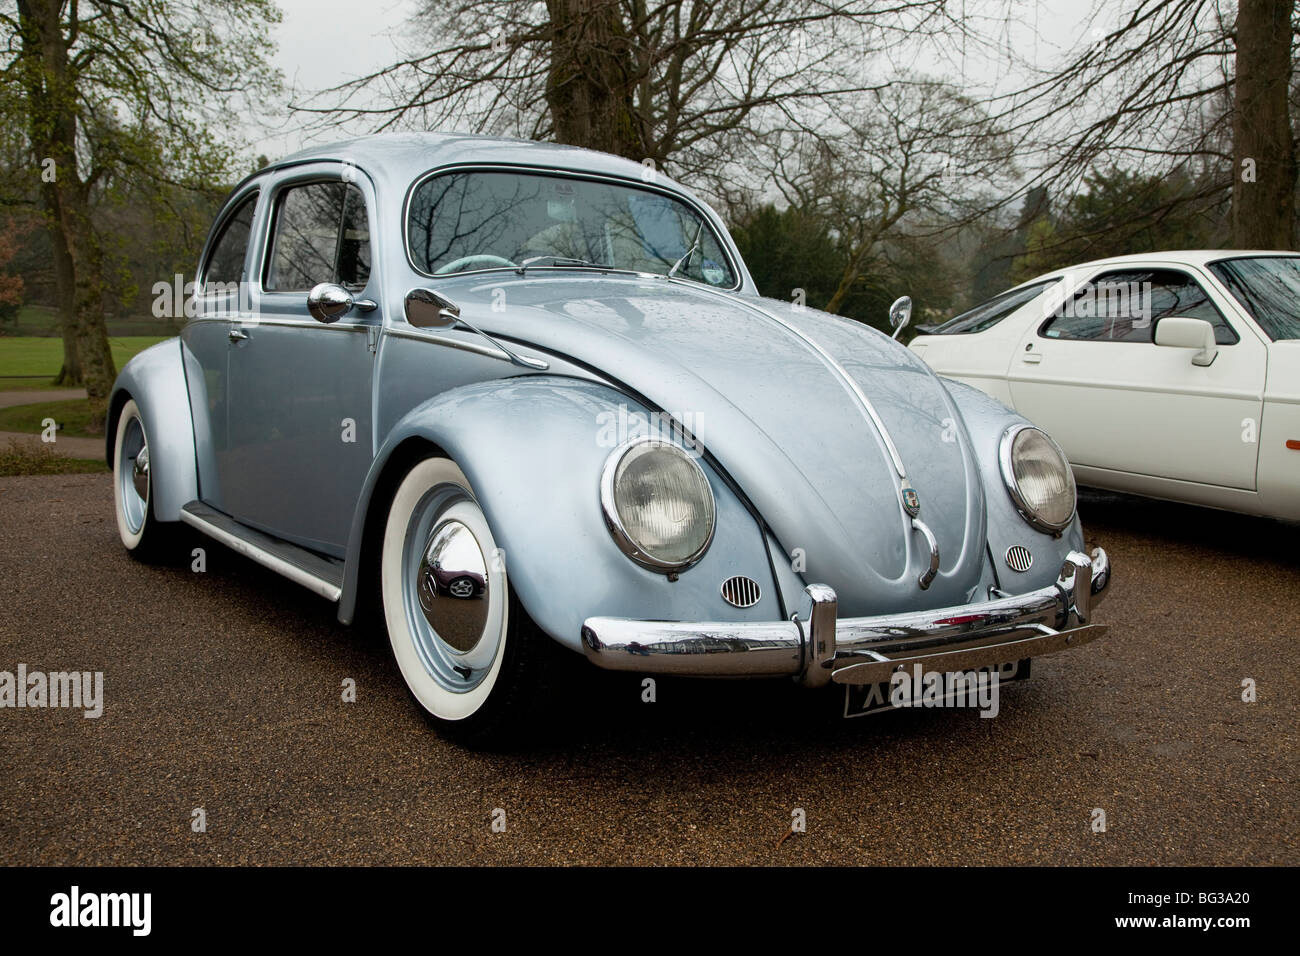 Classic Volkswagen Beetle car from the 1950s Stock Photo